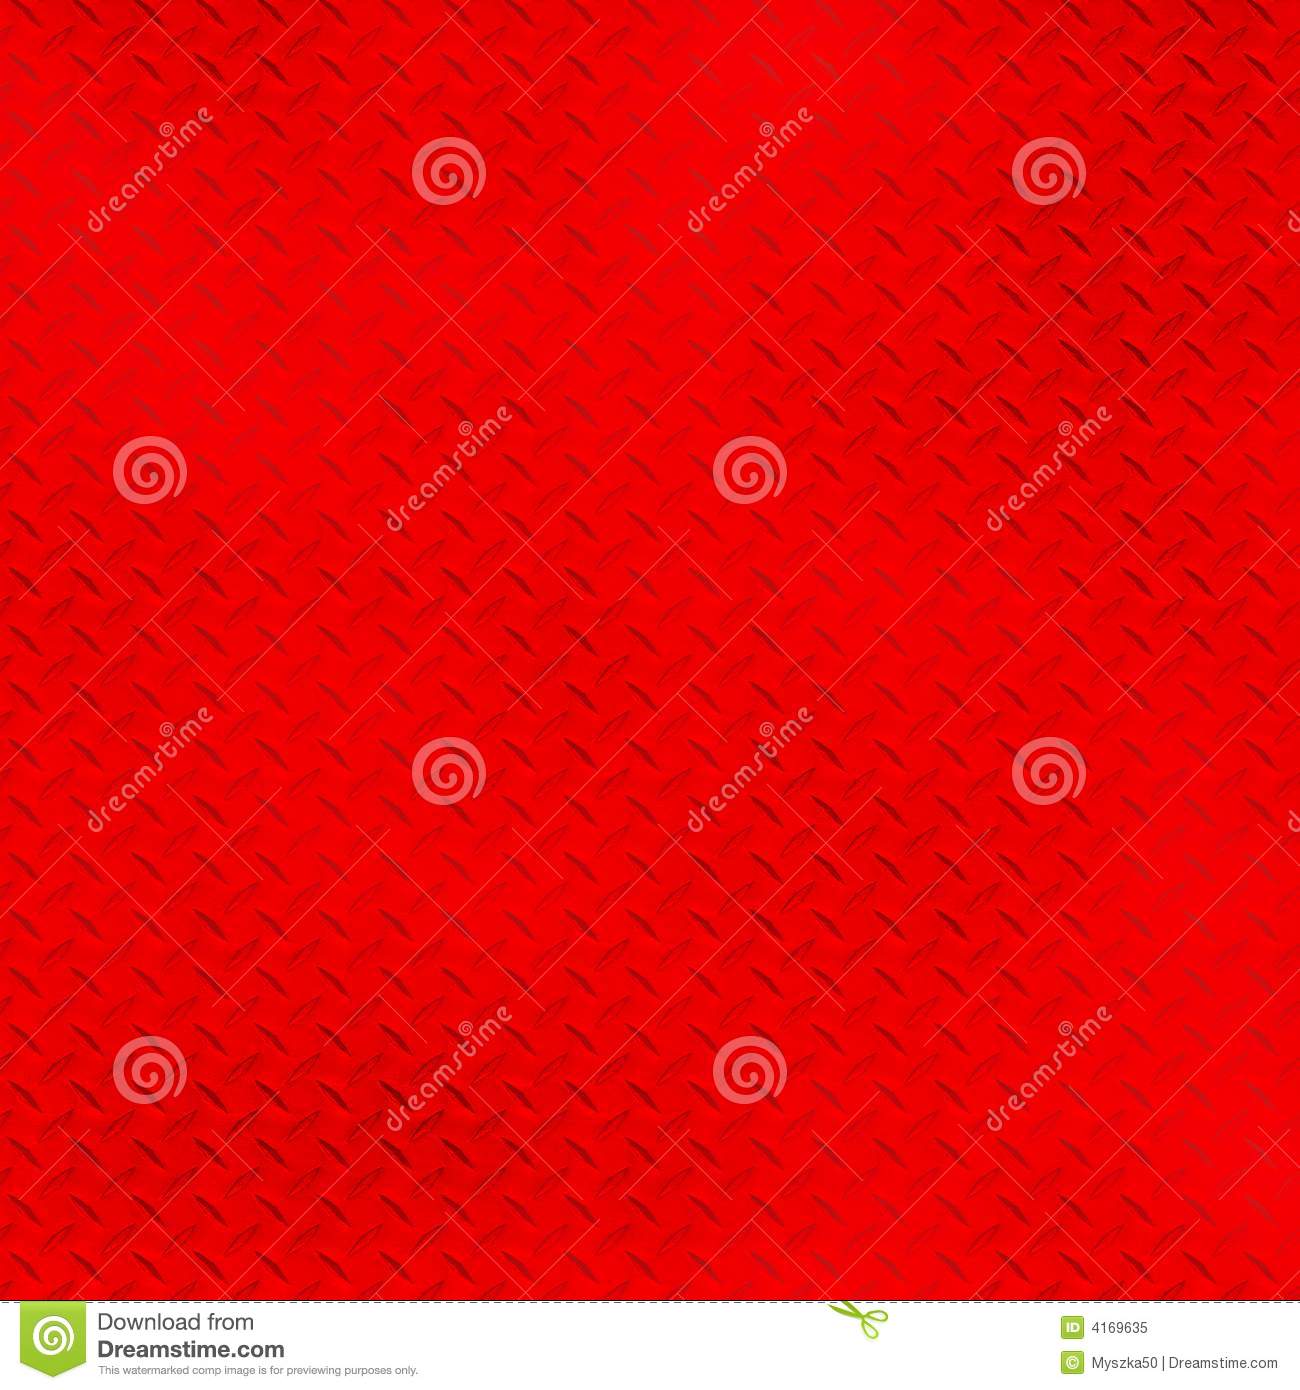 Red Diamond Background Plate